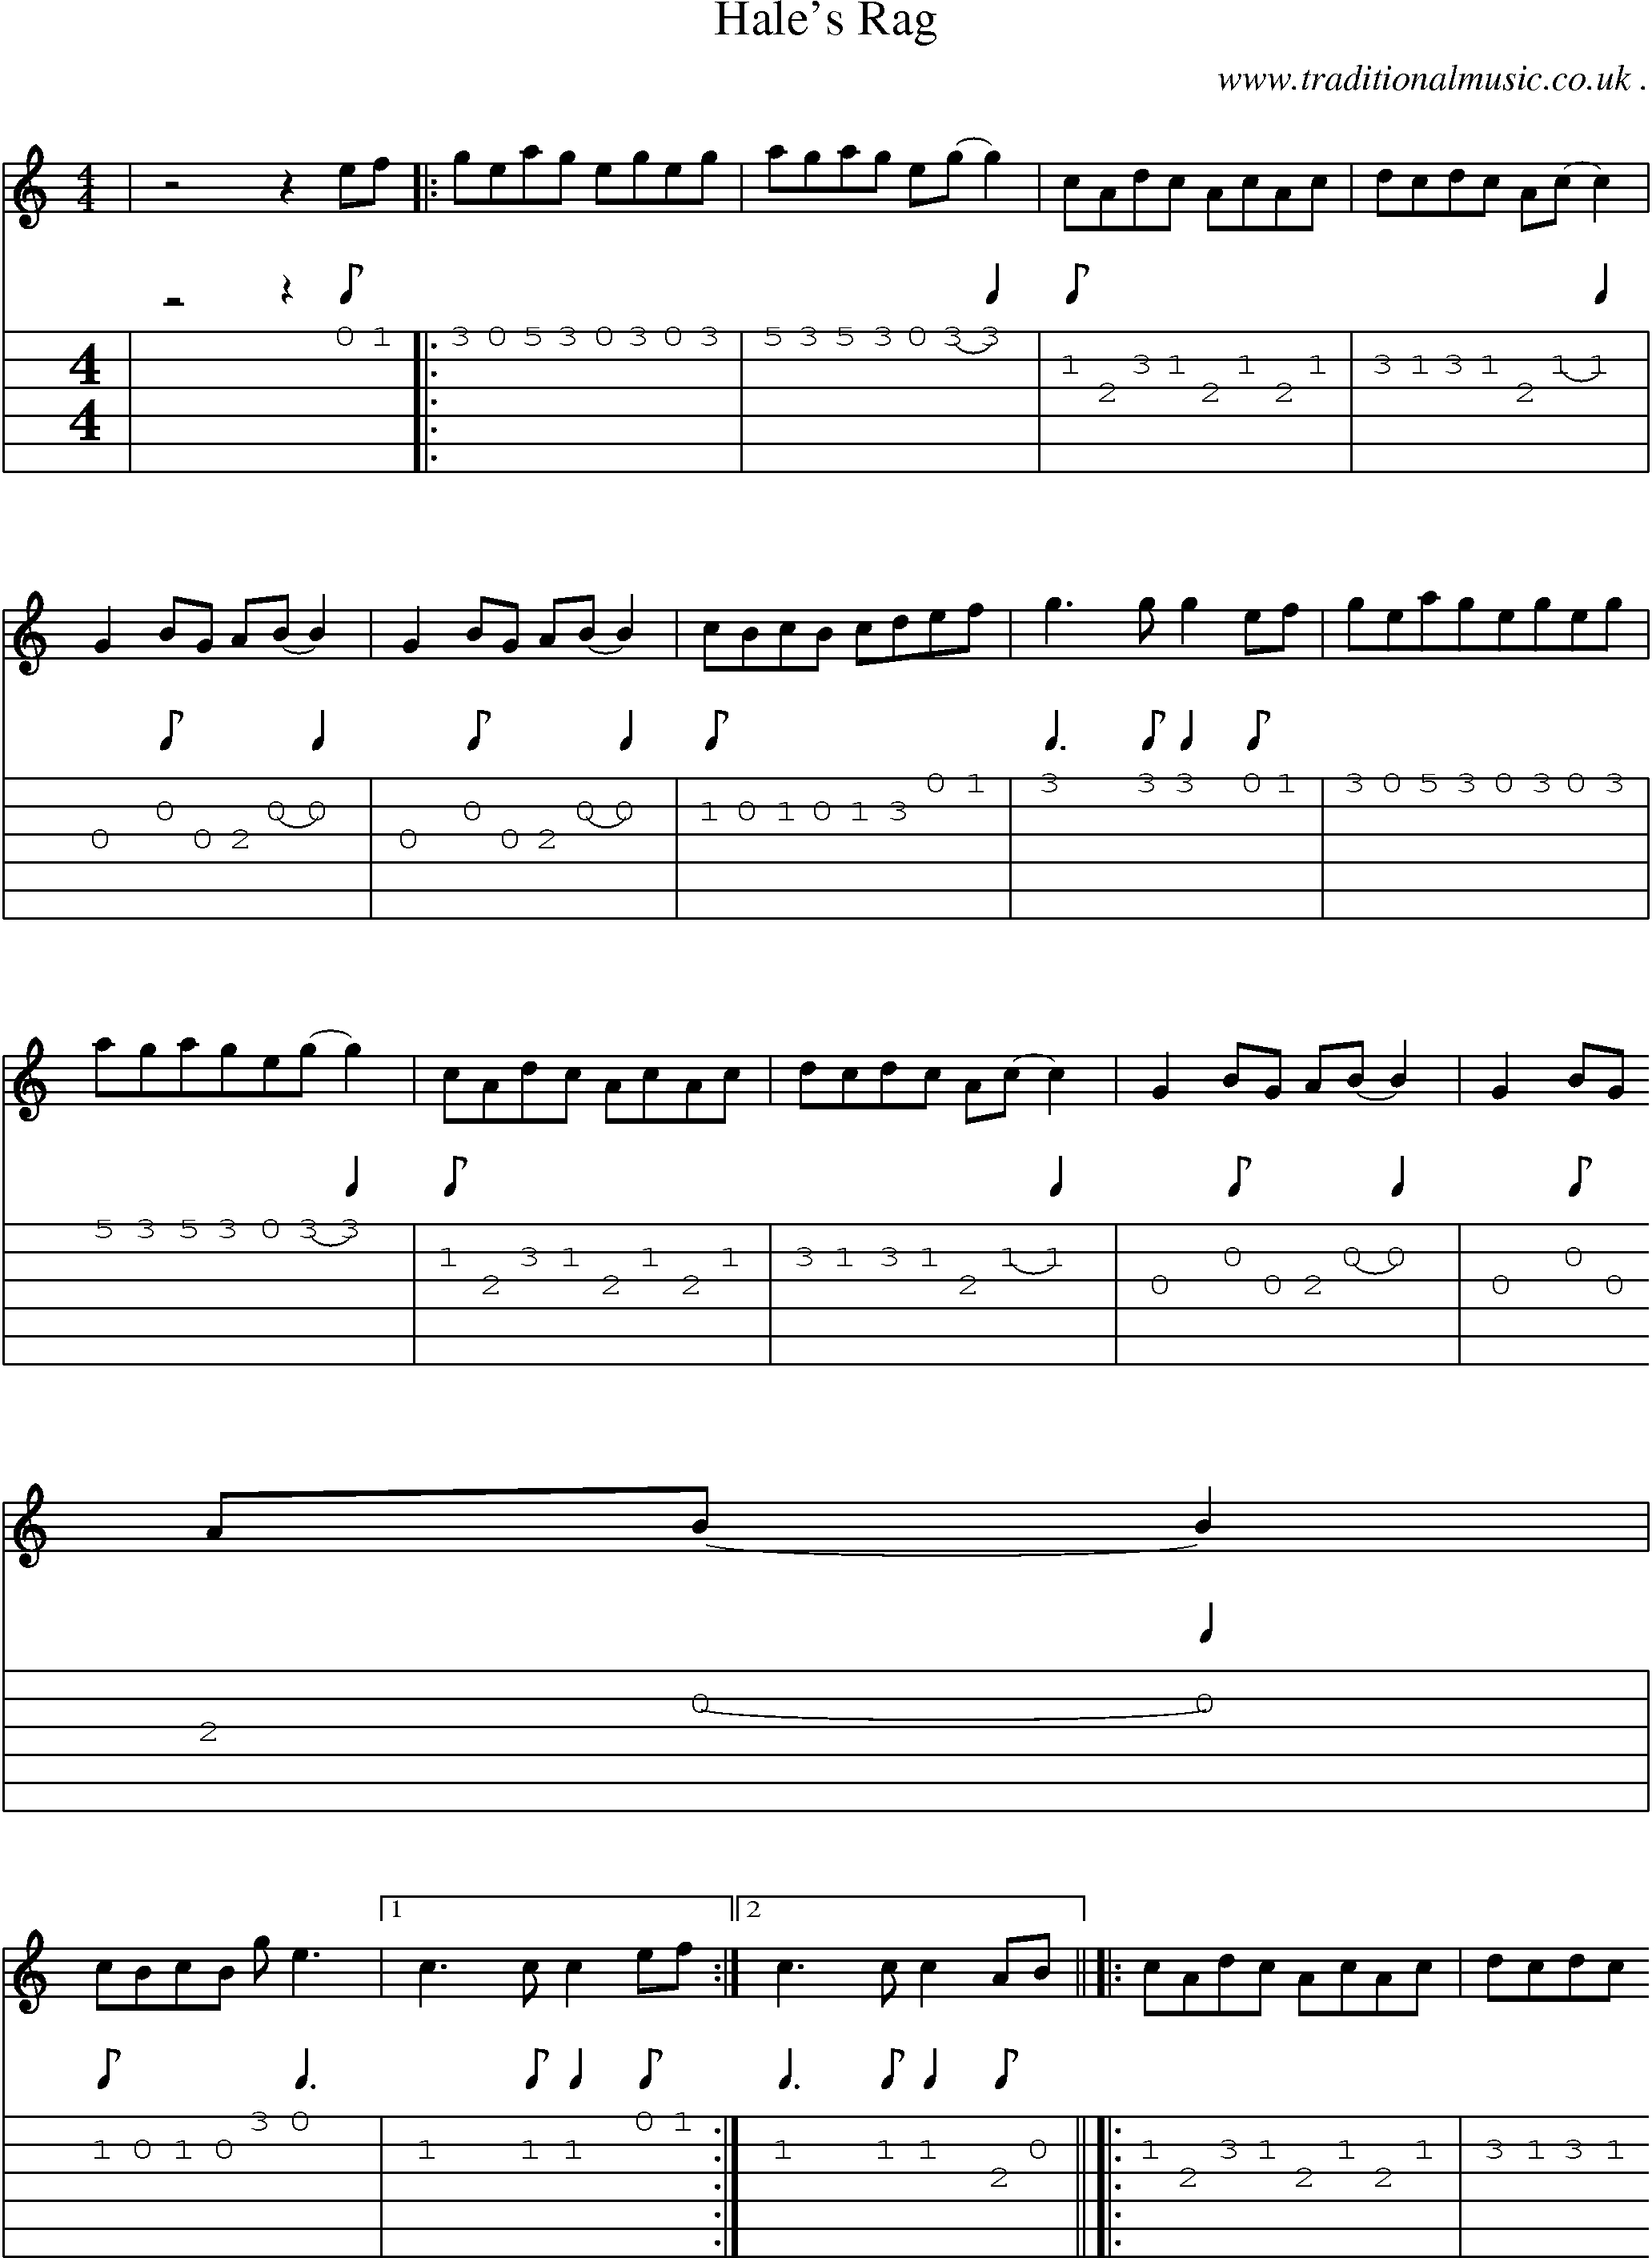 Music Score and Guitar Tabs for Hales Rag